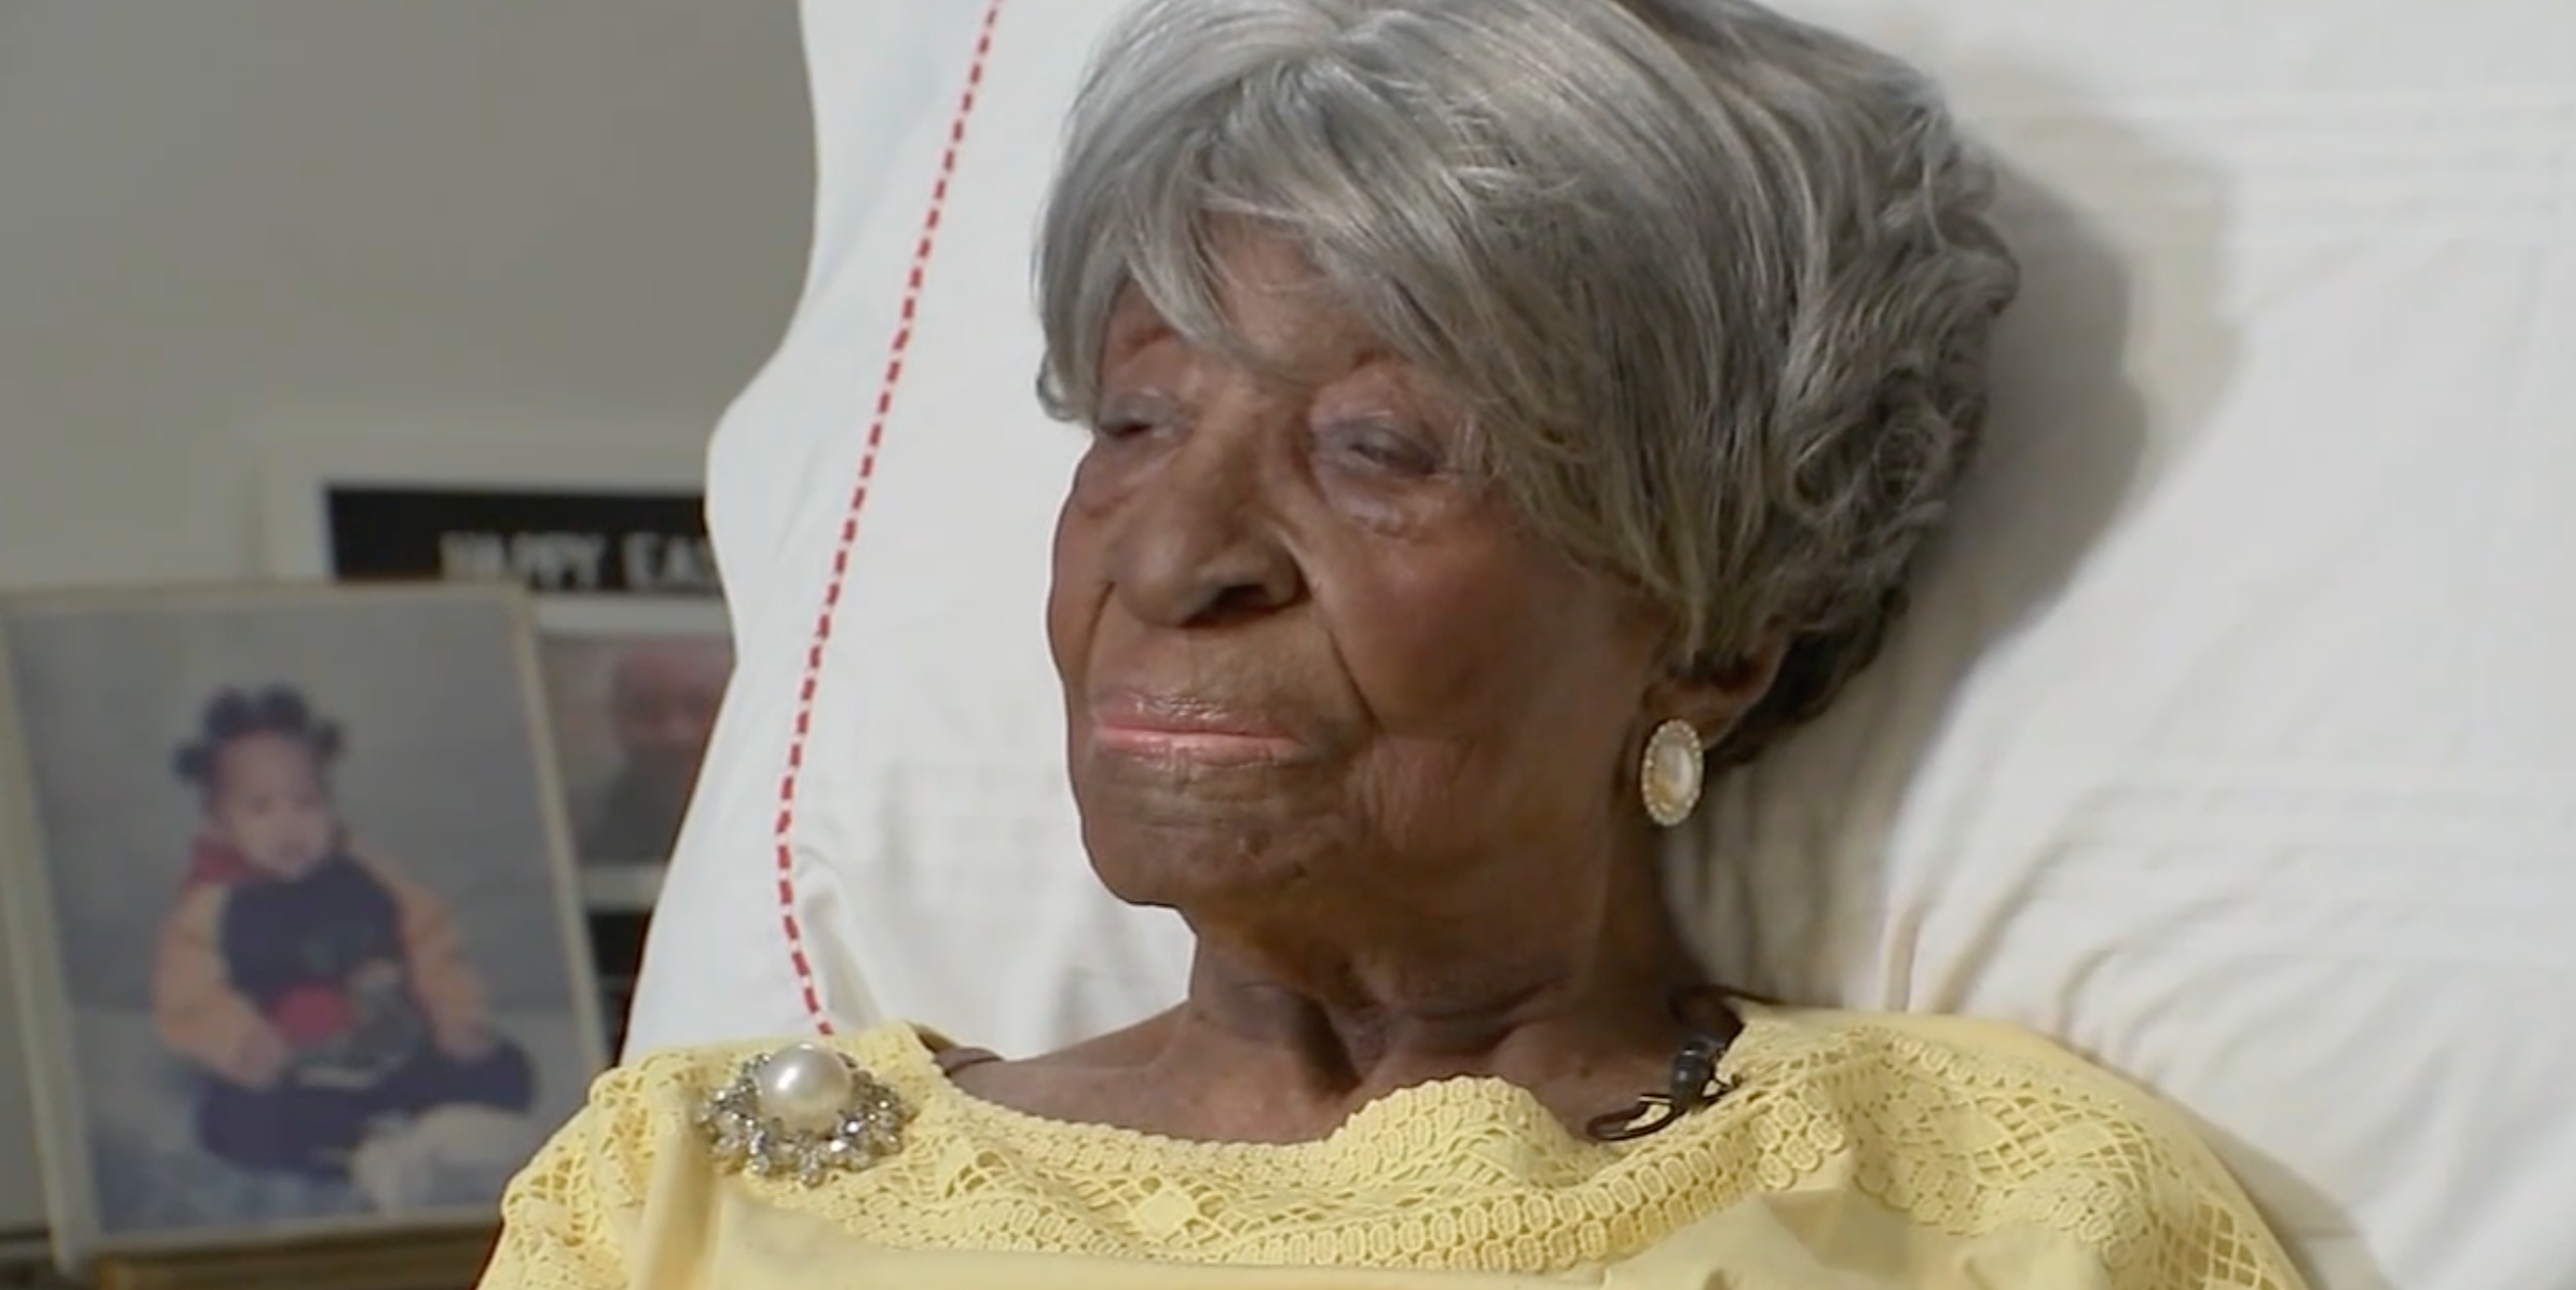 A Black Woman Is The Second-Oldest Person In The Country, And She Just Celebrated Her 114th Birthday